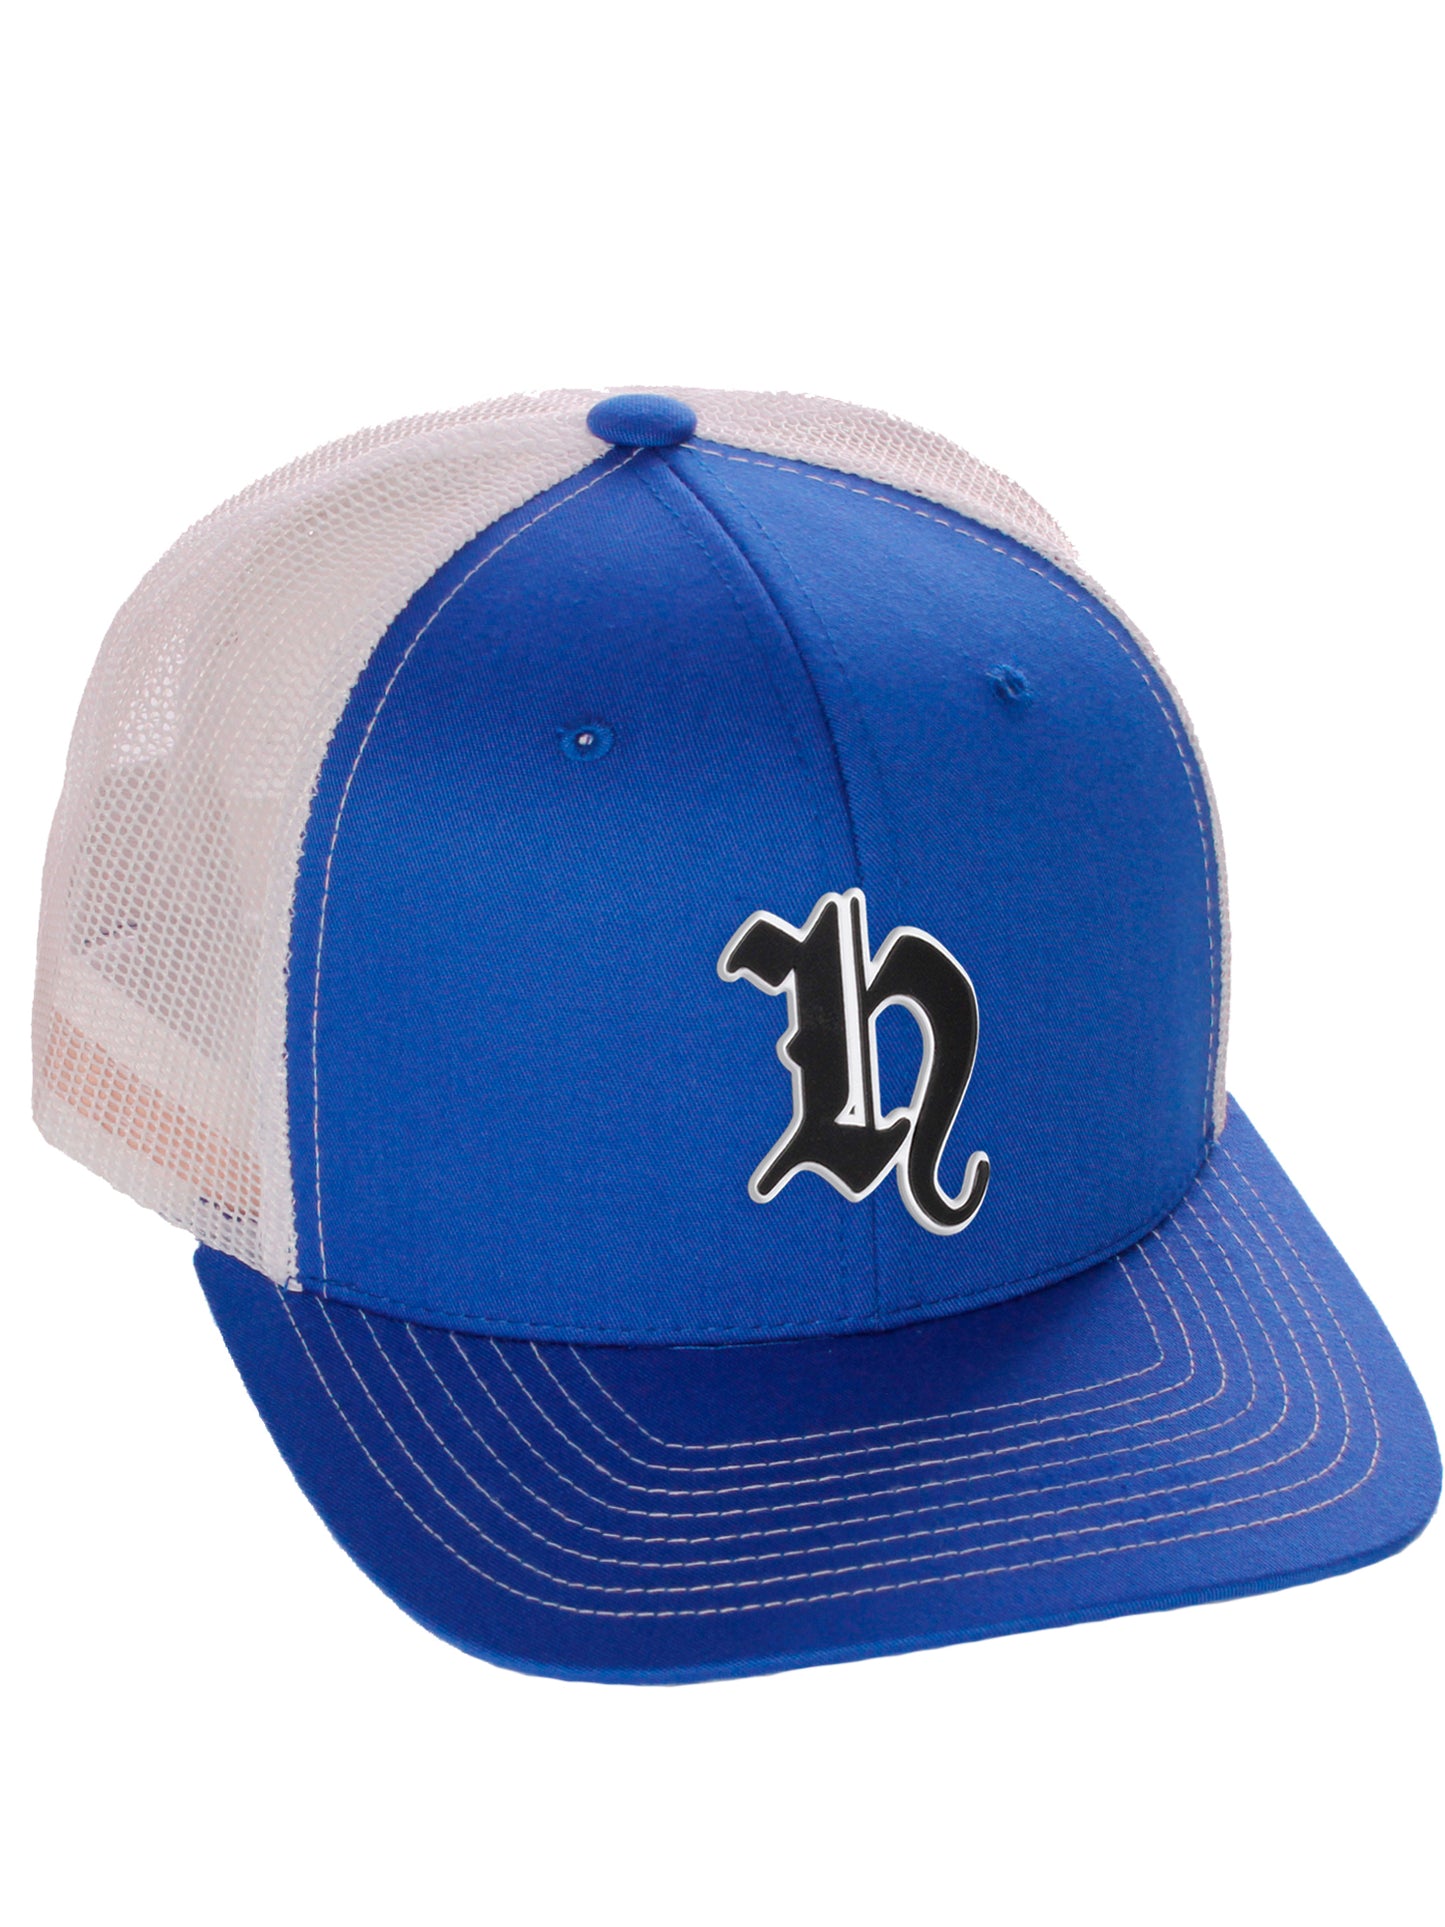 Daxton Classic Baseball Trucker Hat Old English A to Z Letters Numbers Structured Mid Profile Cap